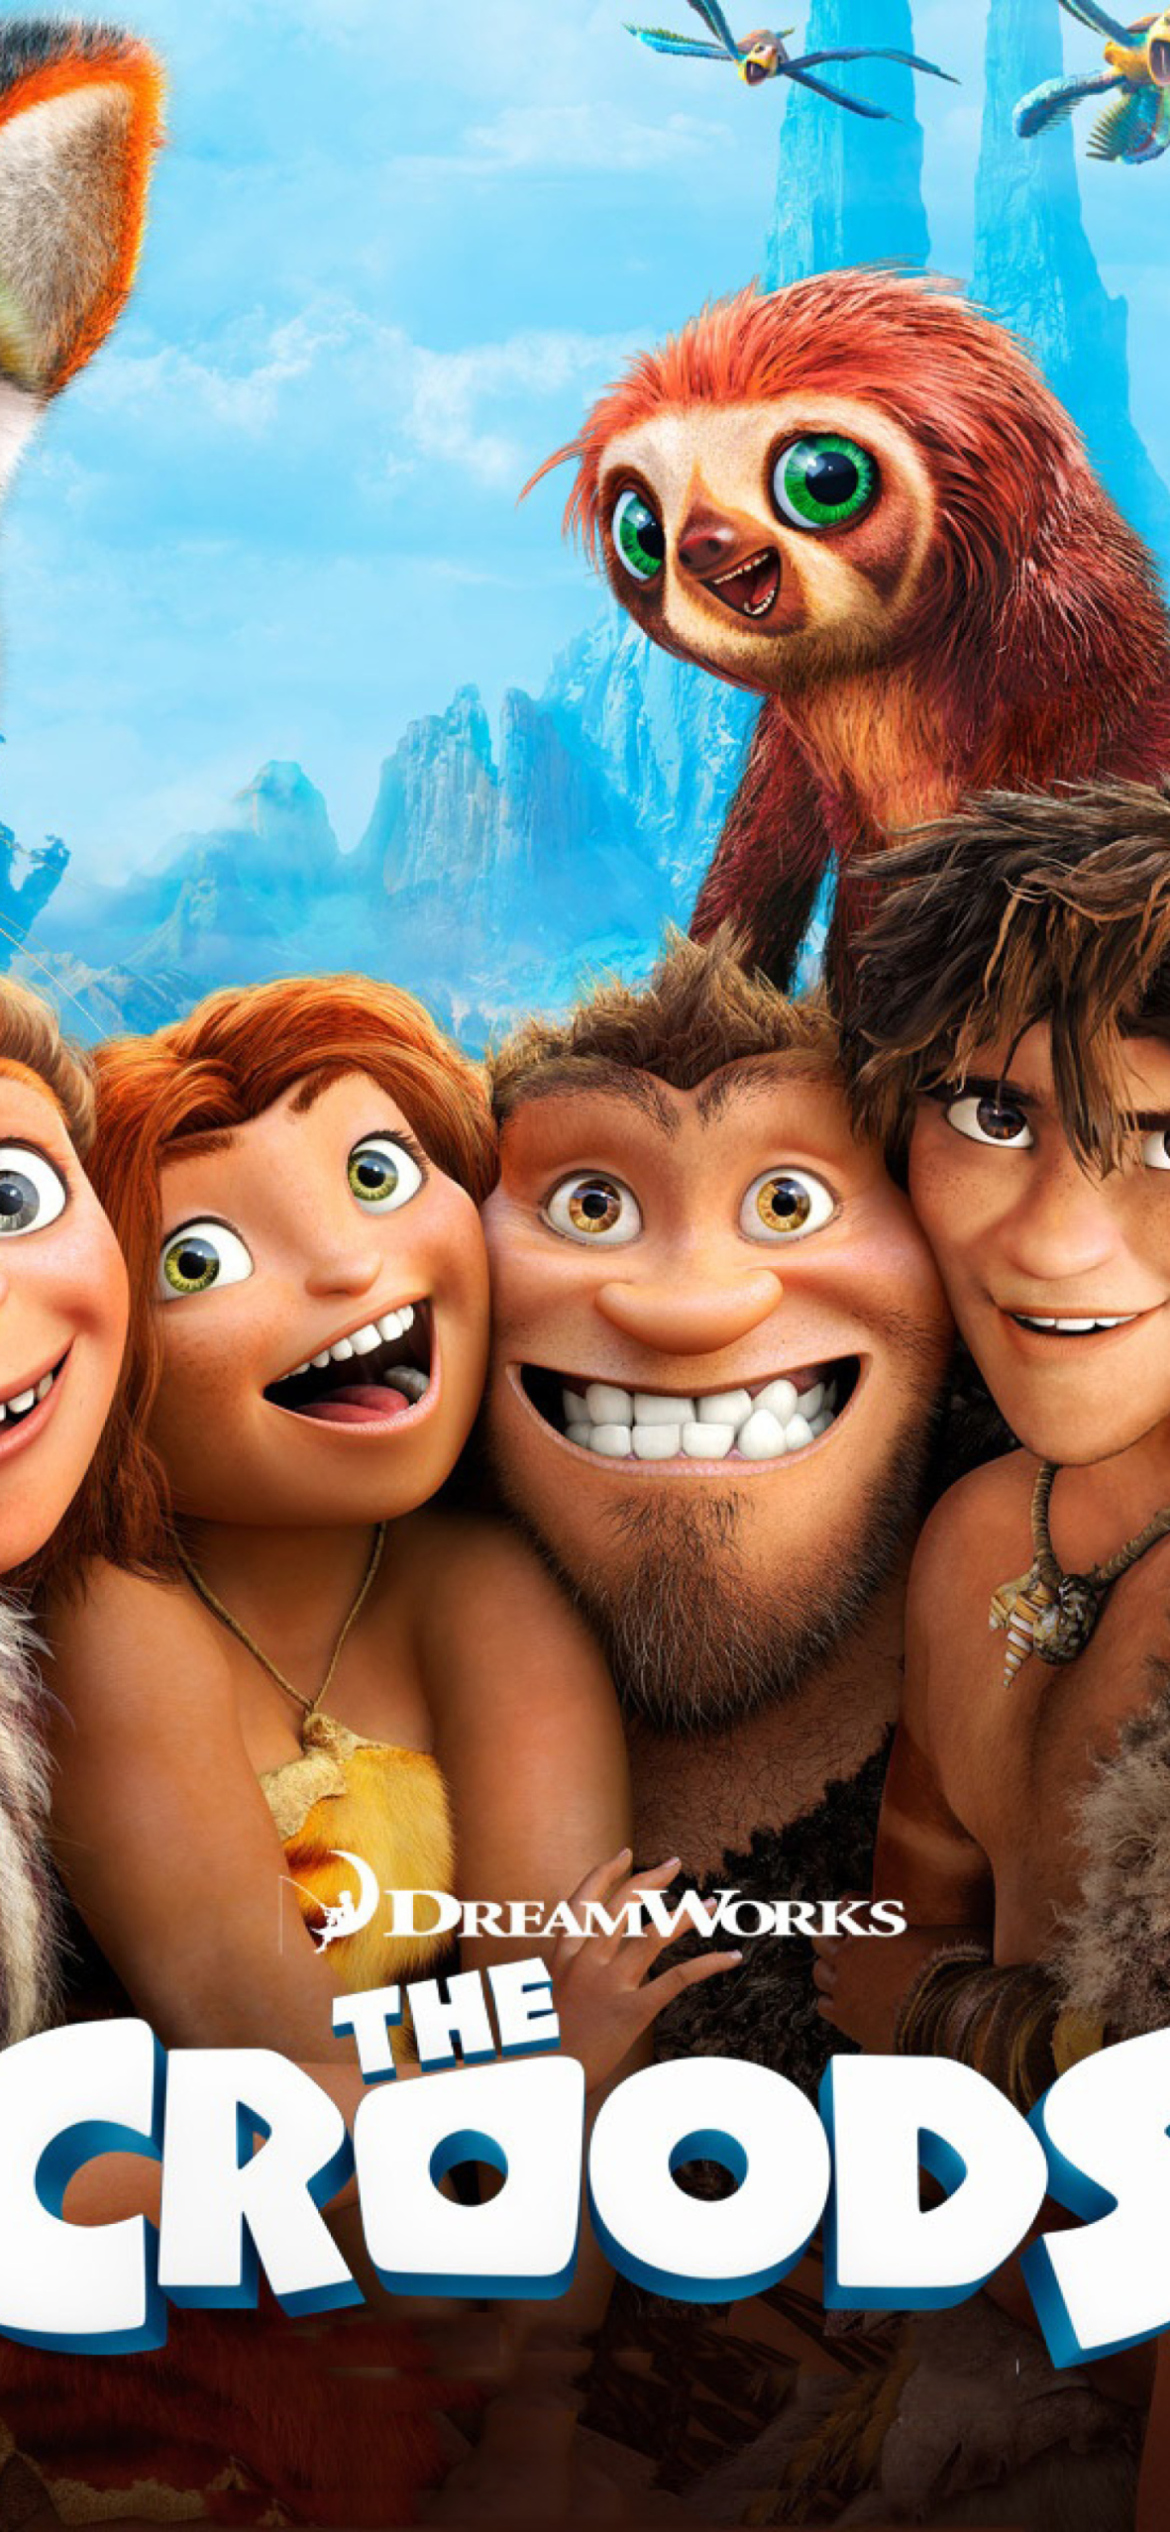 The Croods wallpaper 1170x2532